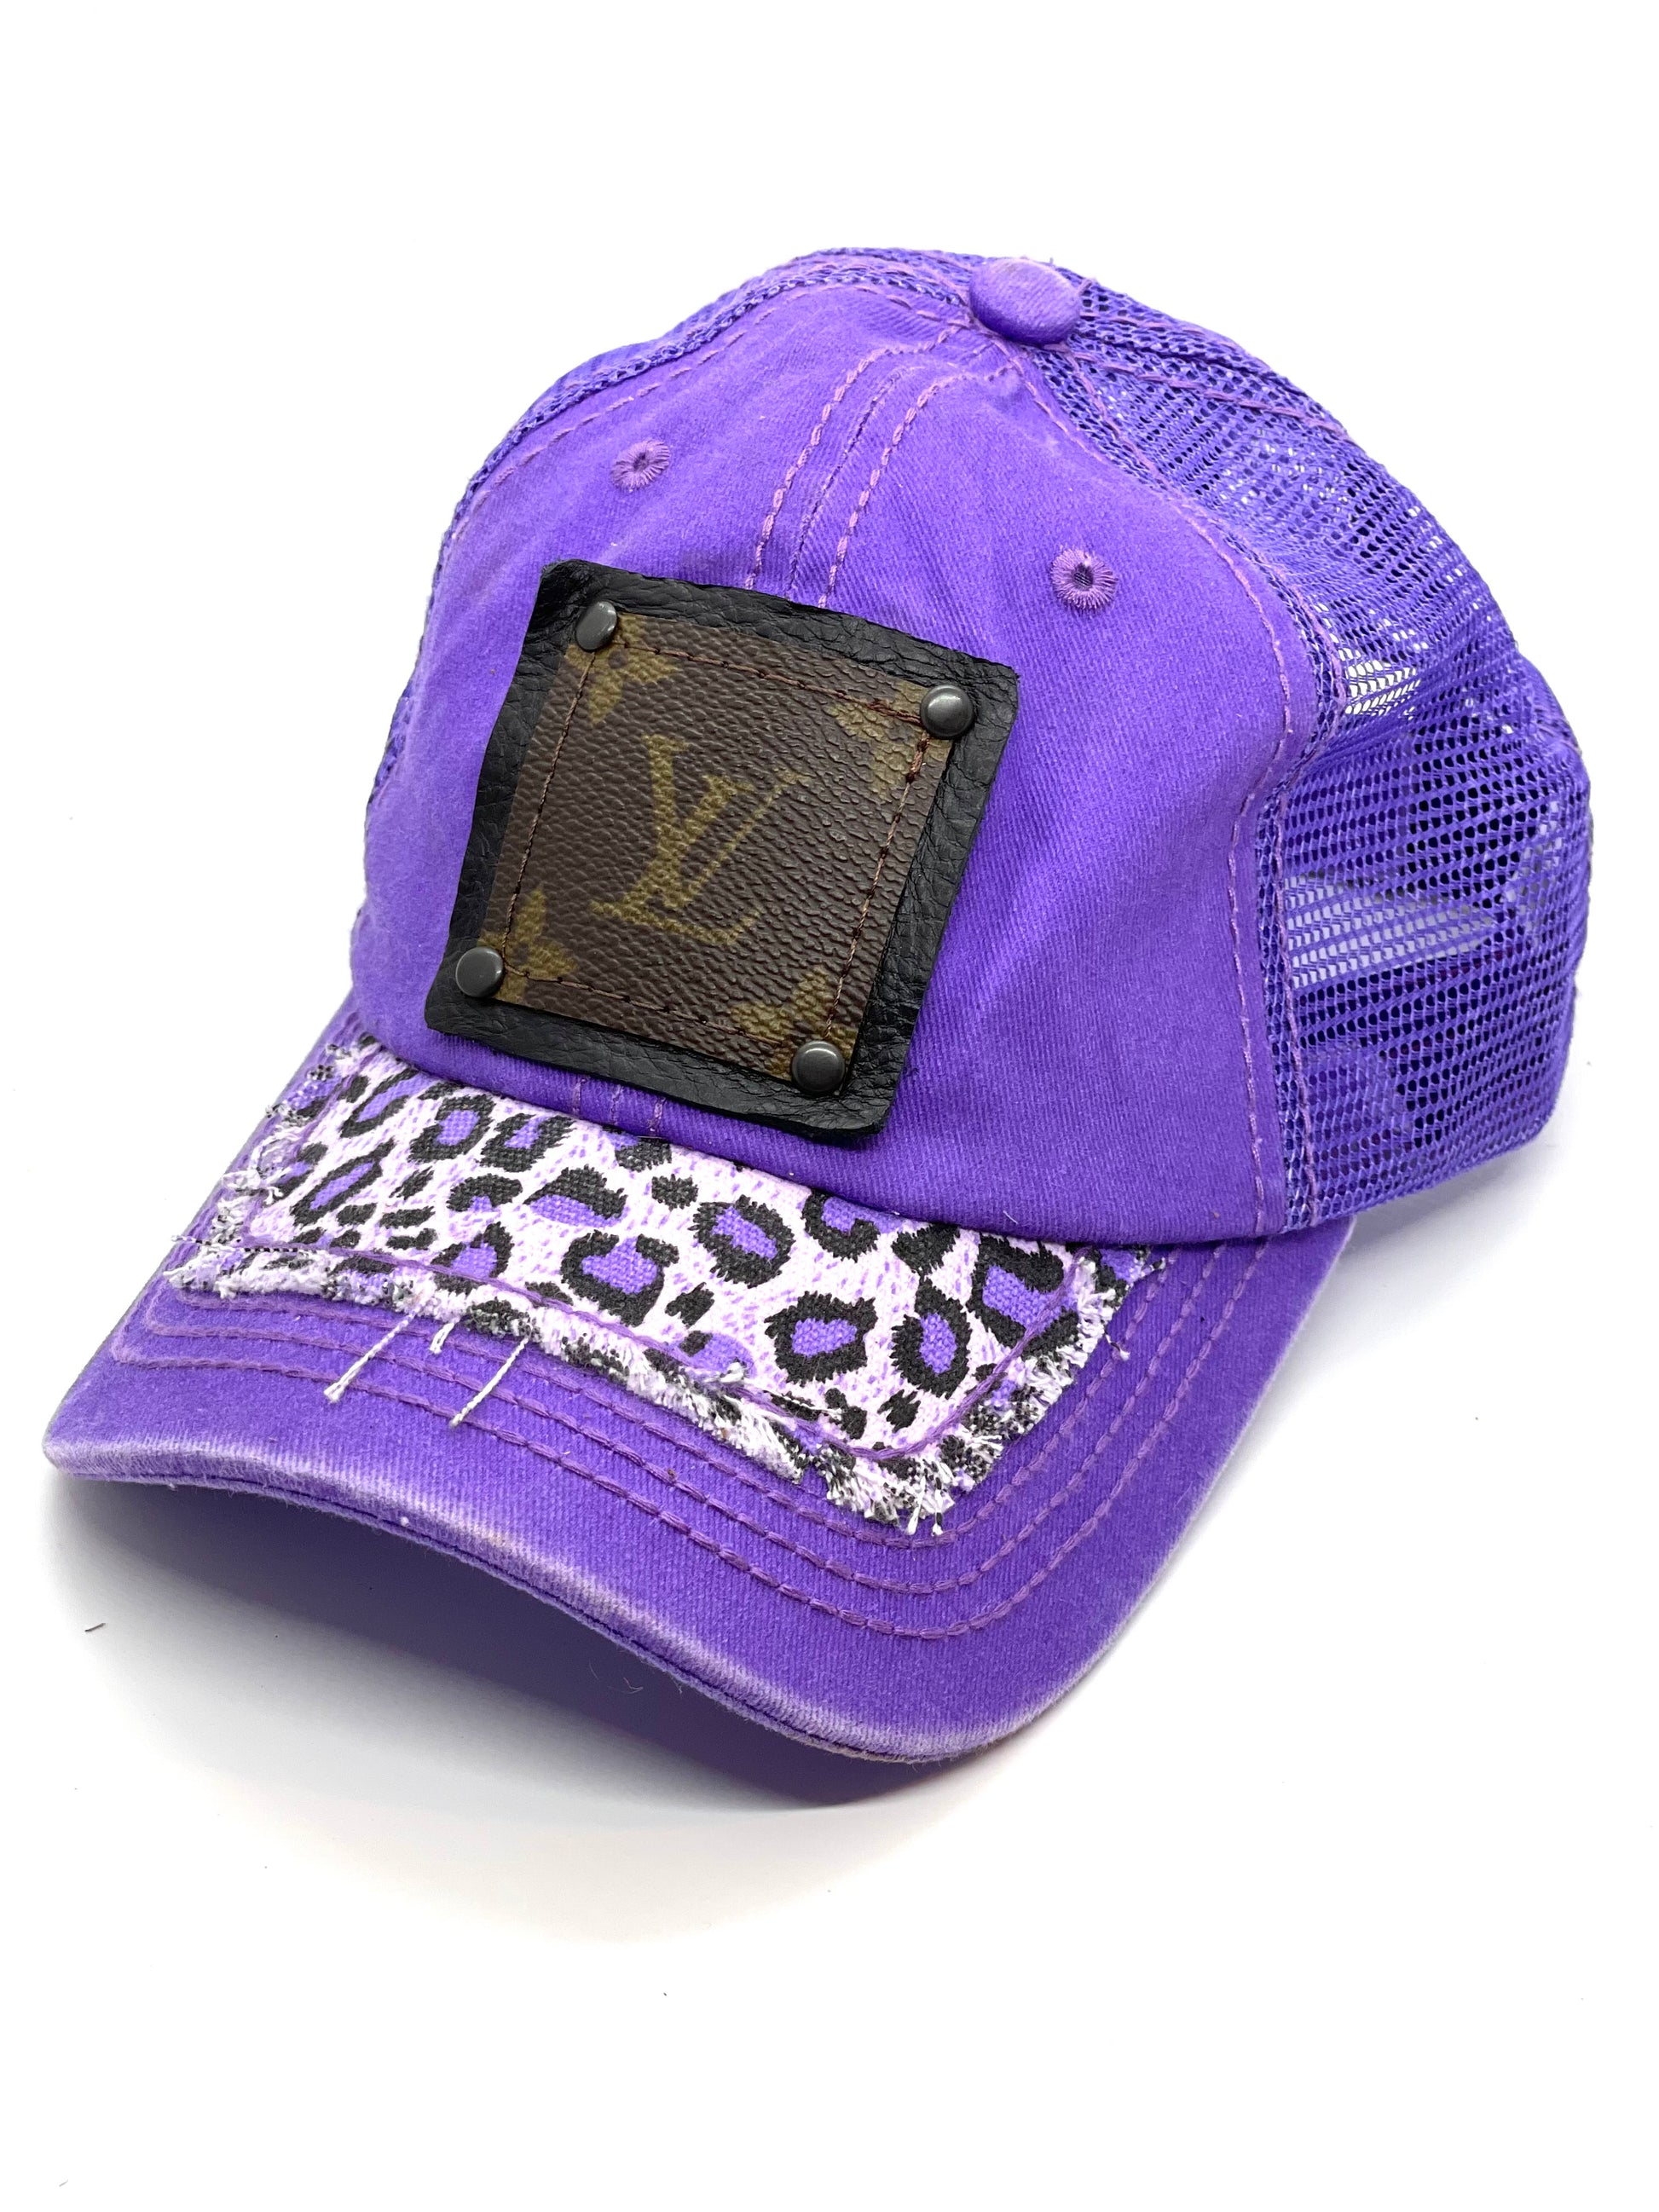 M5 - Lisa - purple leopard hat Black/black - Patches Of Upcycling